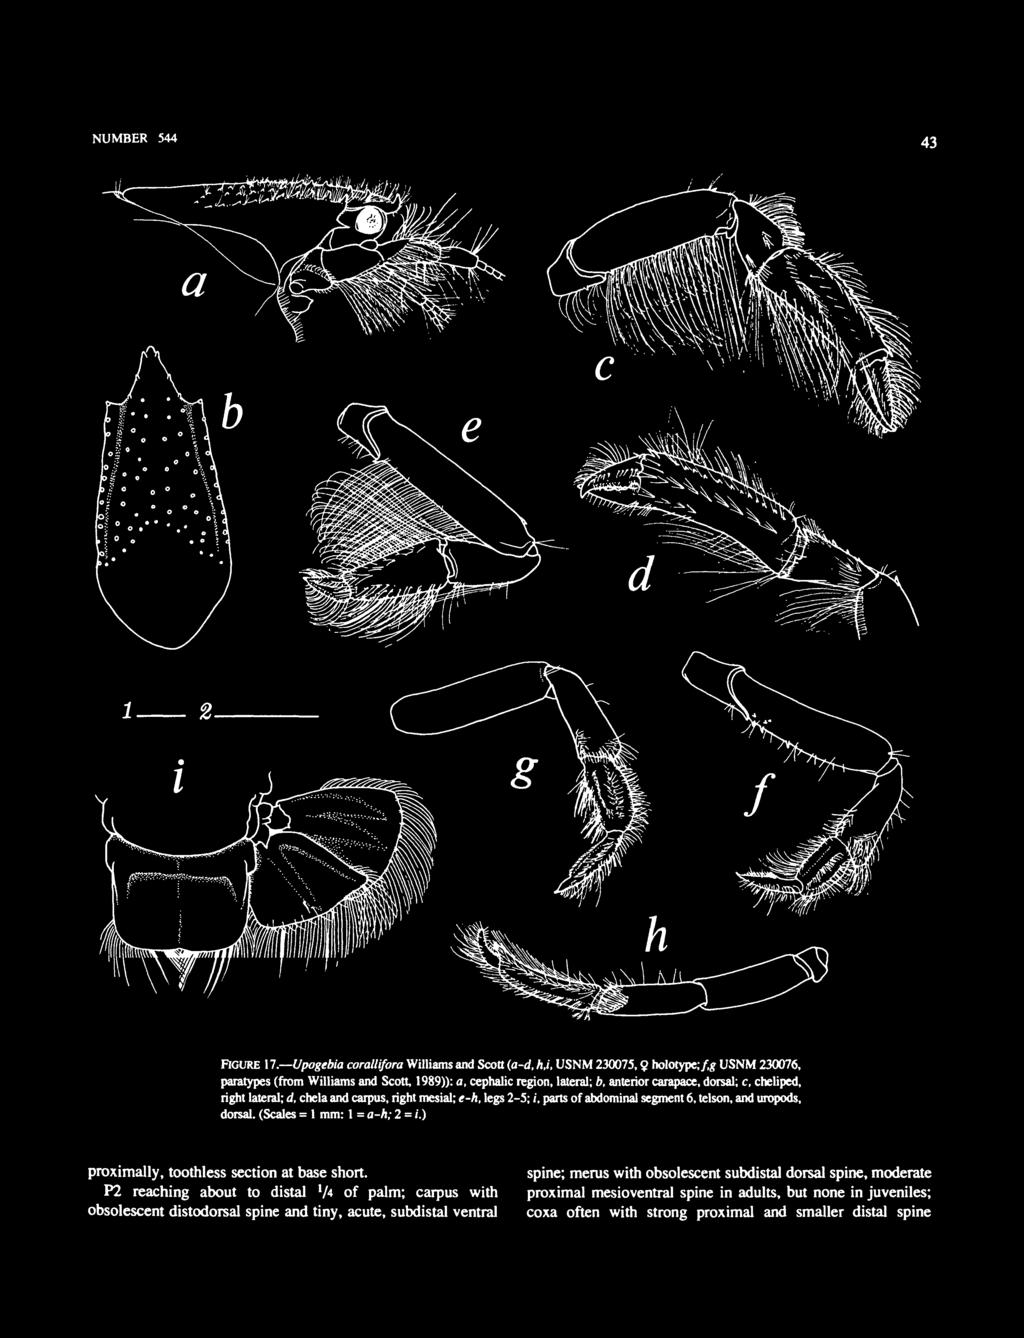 carapace, dorsal; c, cheliped, right lateral; d, chela and carpus,rightmesial; e-h, legs 2-5; i, parts of abdominal segment 6, telson, and uropods, dorsal.